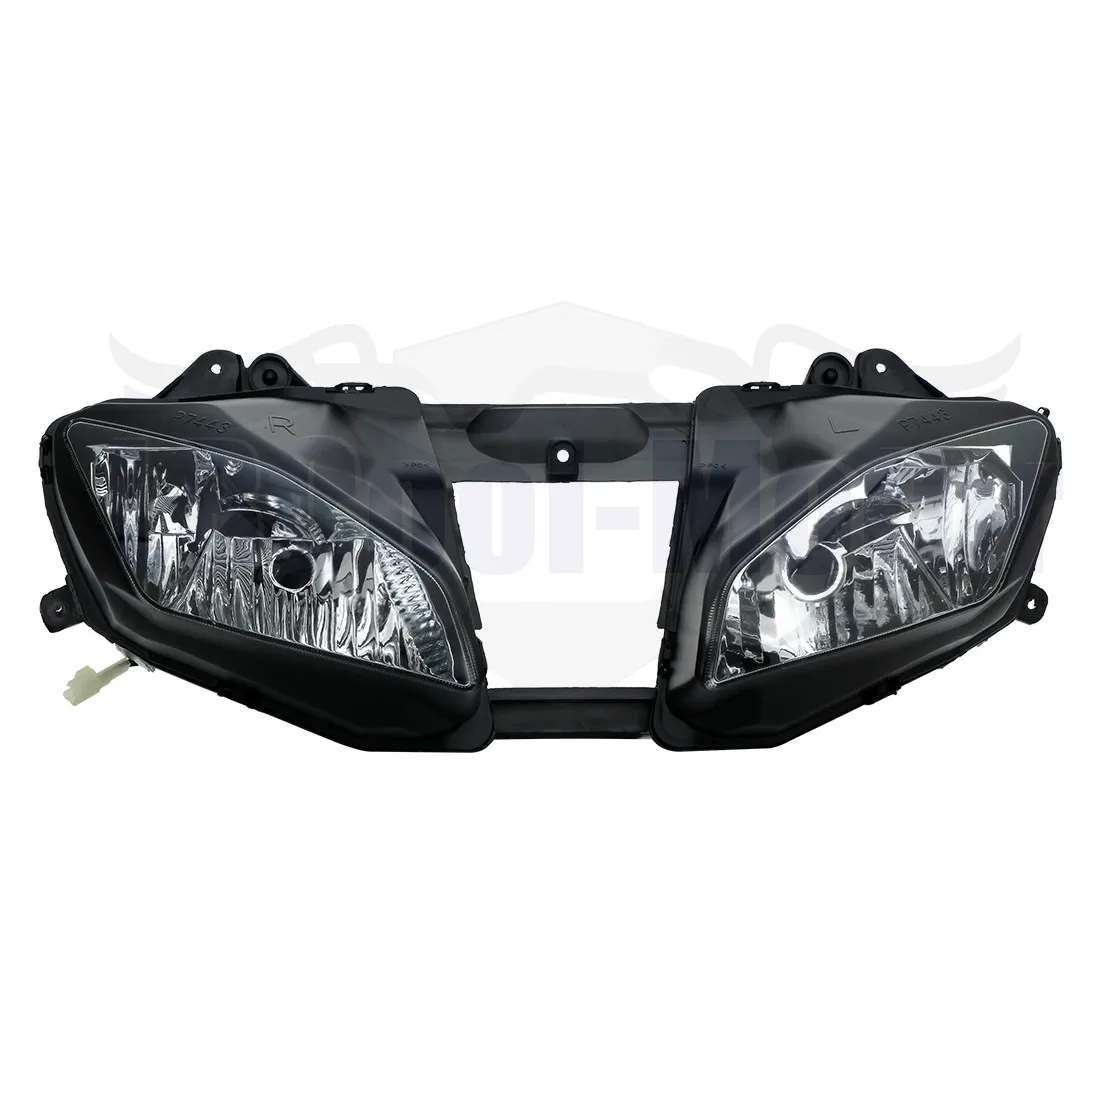 

Motorcycle Headlight Assembly Lamps For HONDA CBR600 F4I 2001-2007 2002 2003 2004 2005 2006 33100-MBW-A11